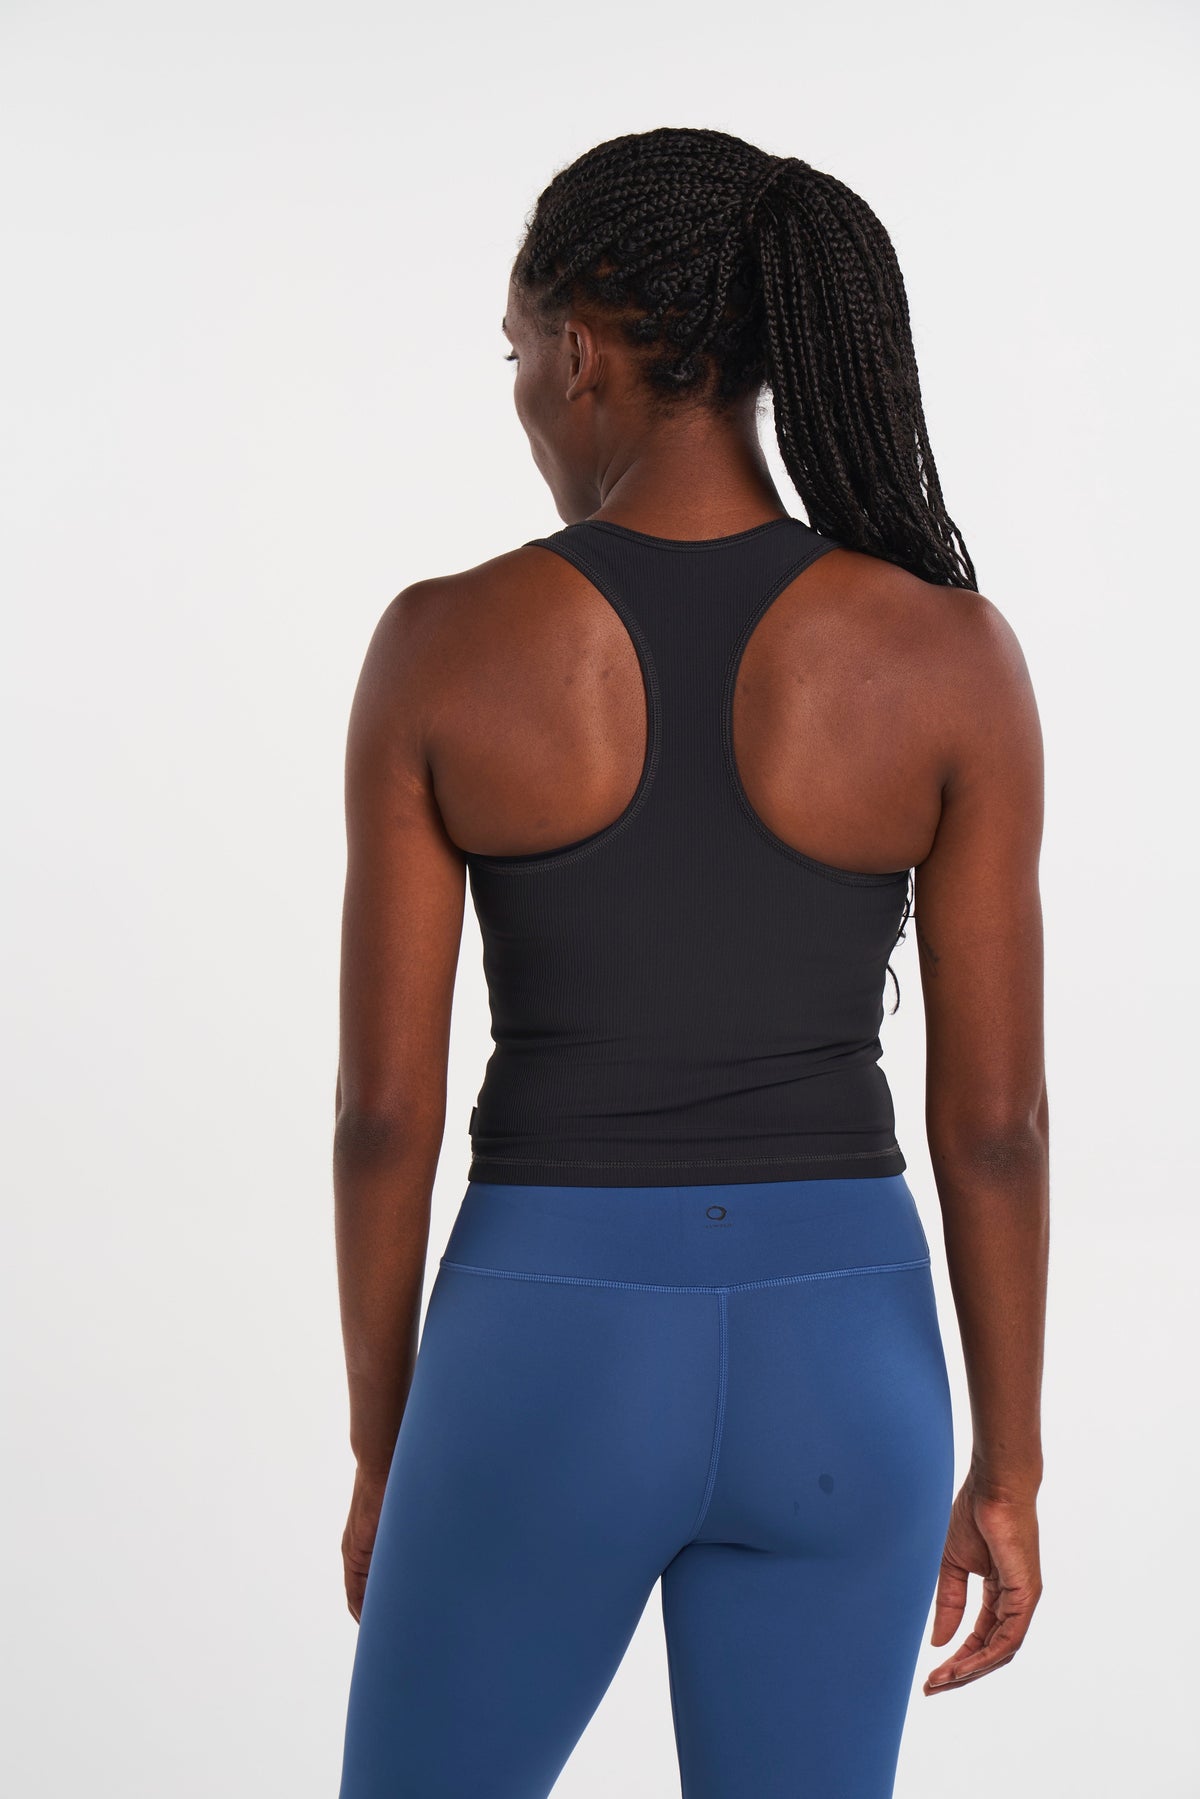 Breathable athletic tank top made from sustainable materials